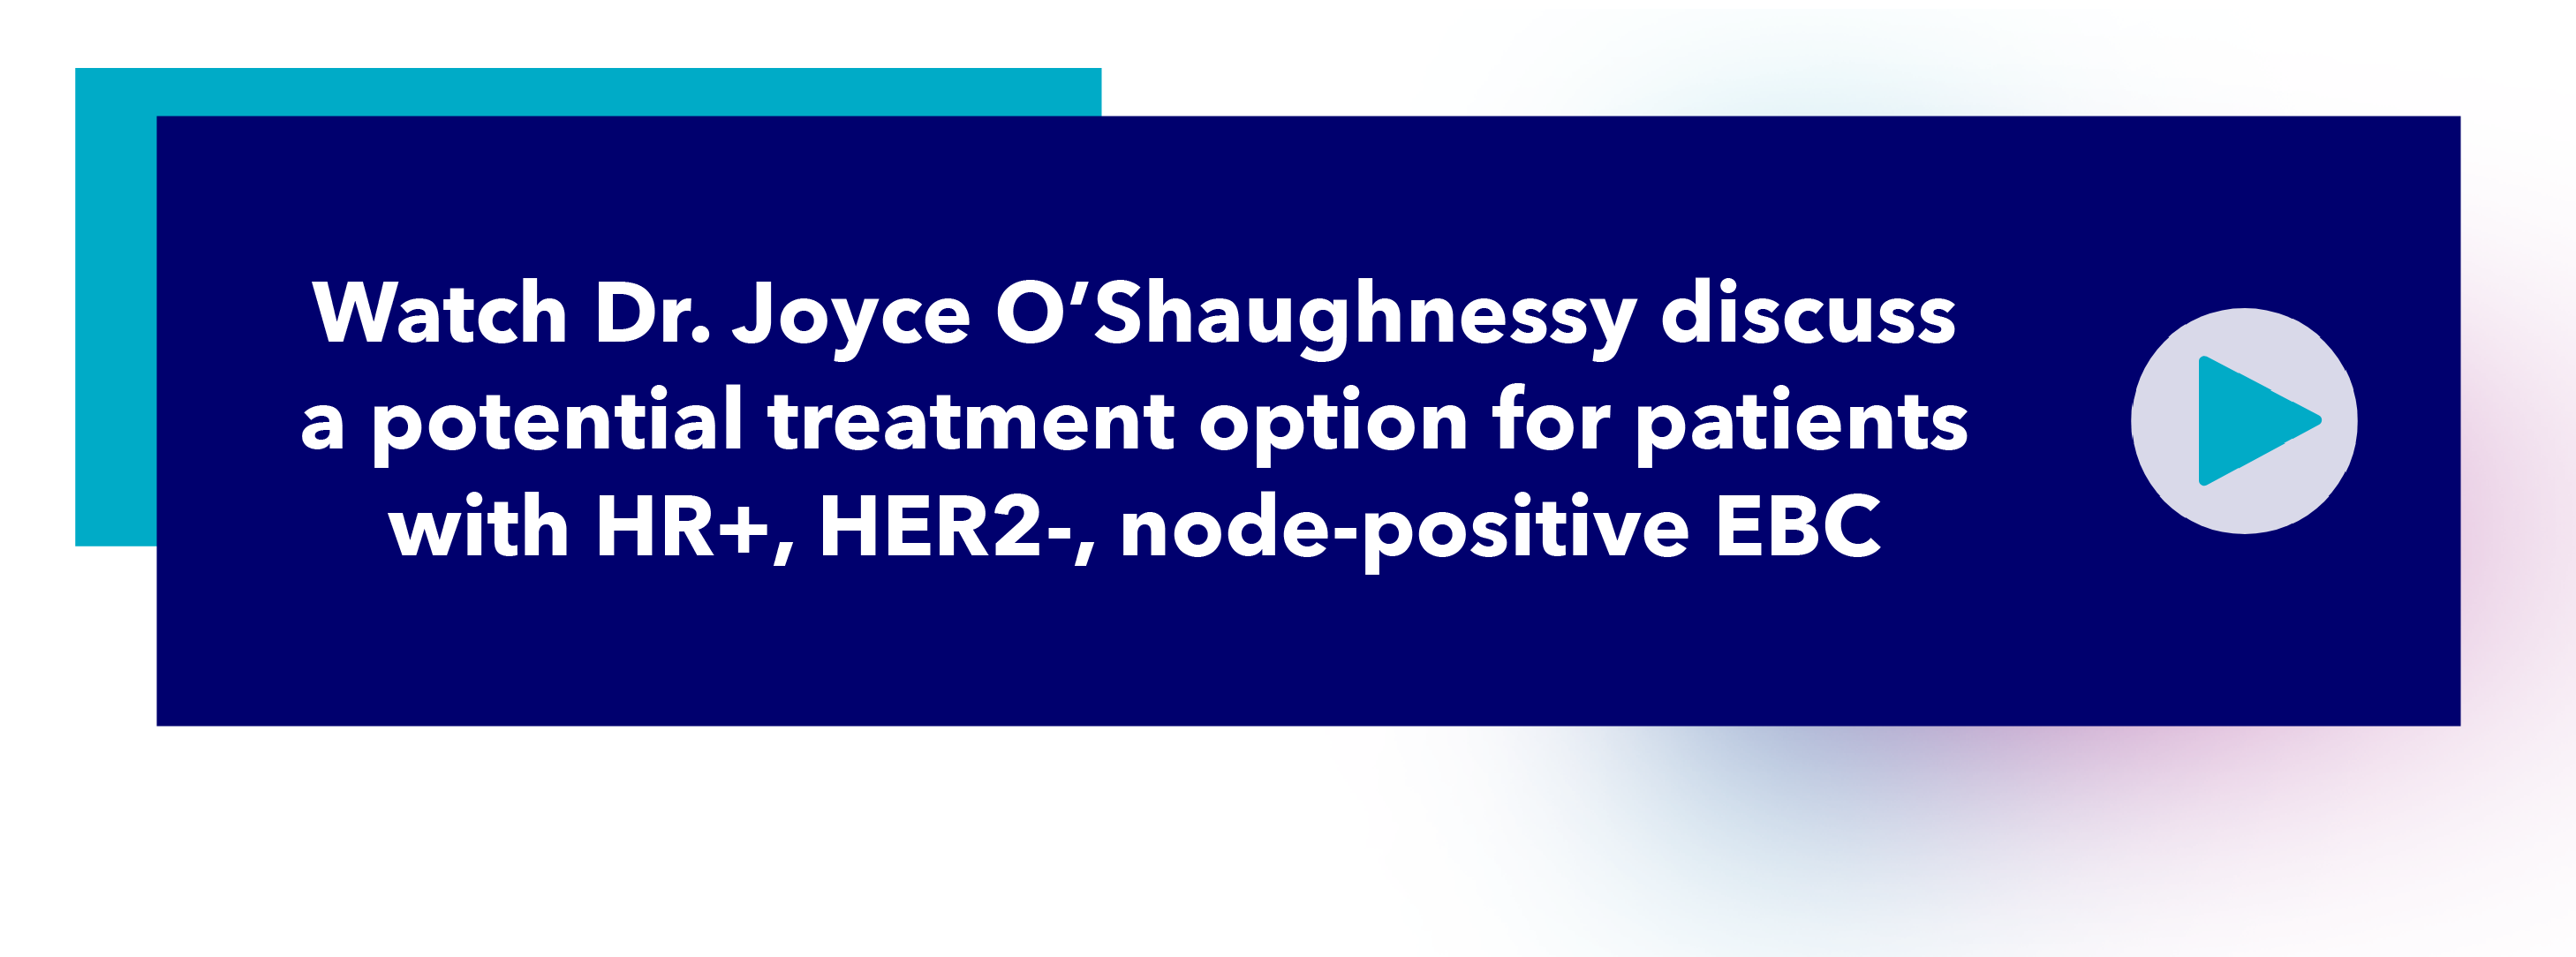 Watch Dr. Joyce O'Shaughnessy discuss a potential treatment option for patients